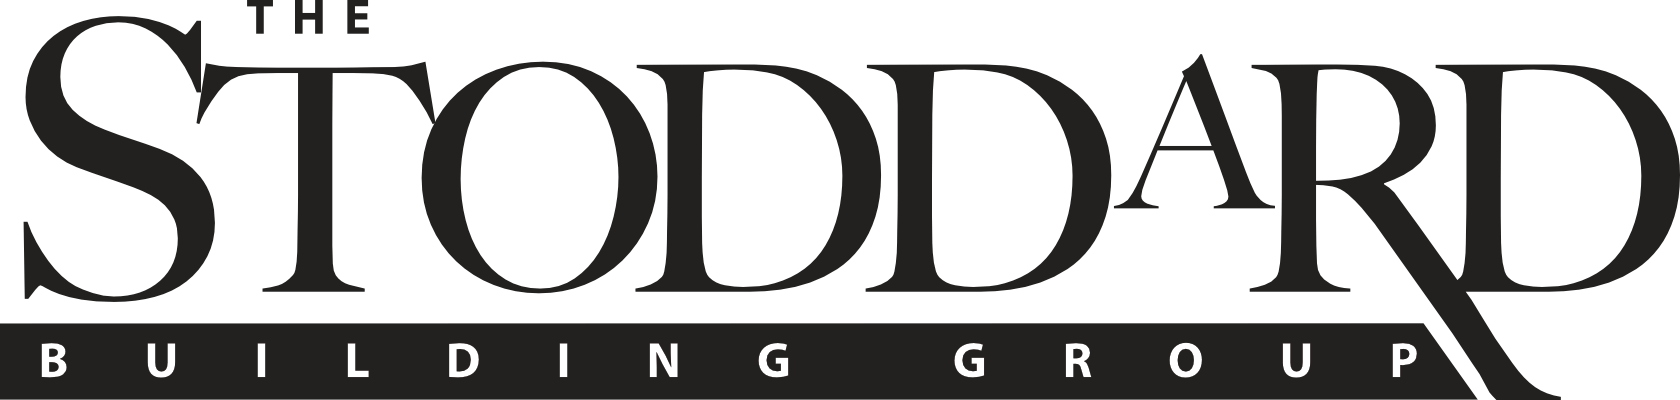 The Stoddard Building Group Logo